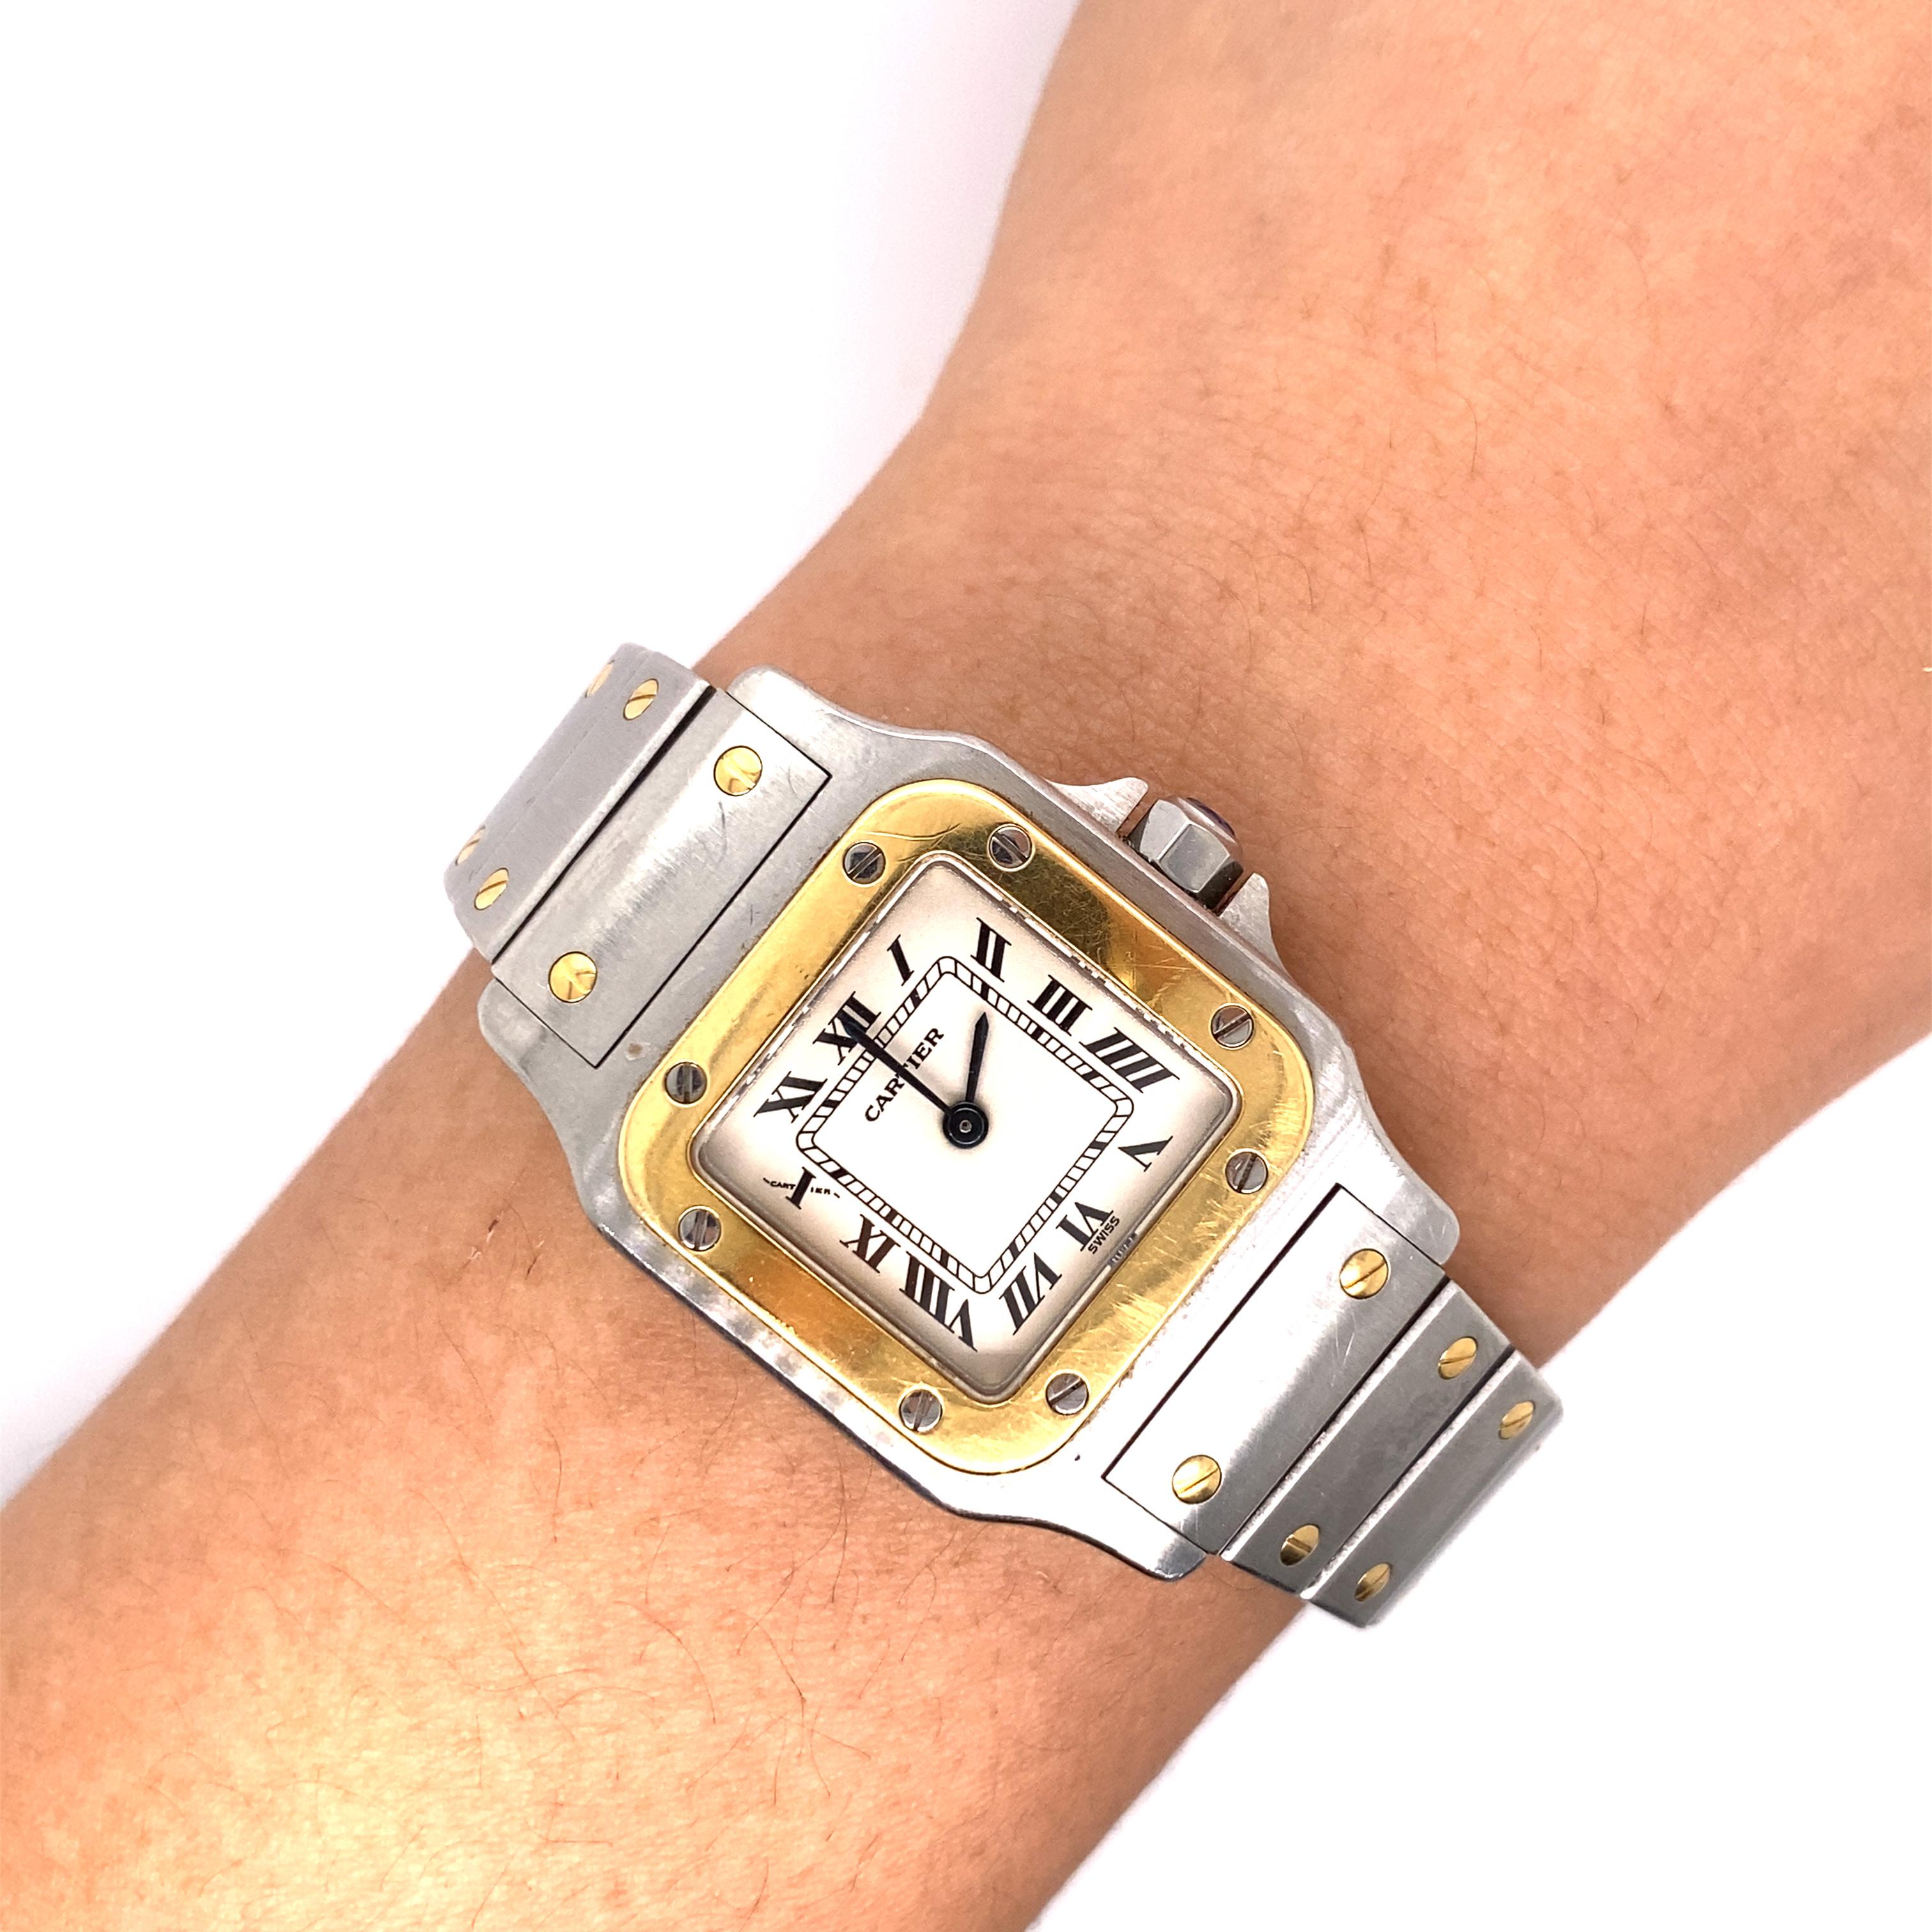 Cartier Stainless Steel and 18k Gold 'Santos' Wristwatch 1